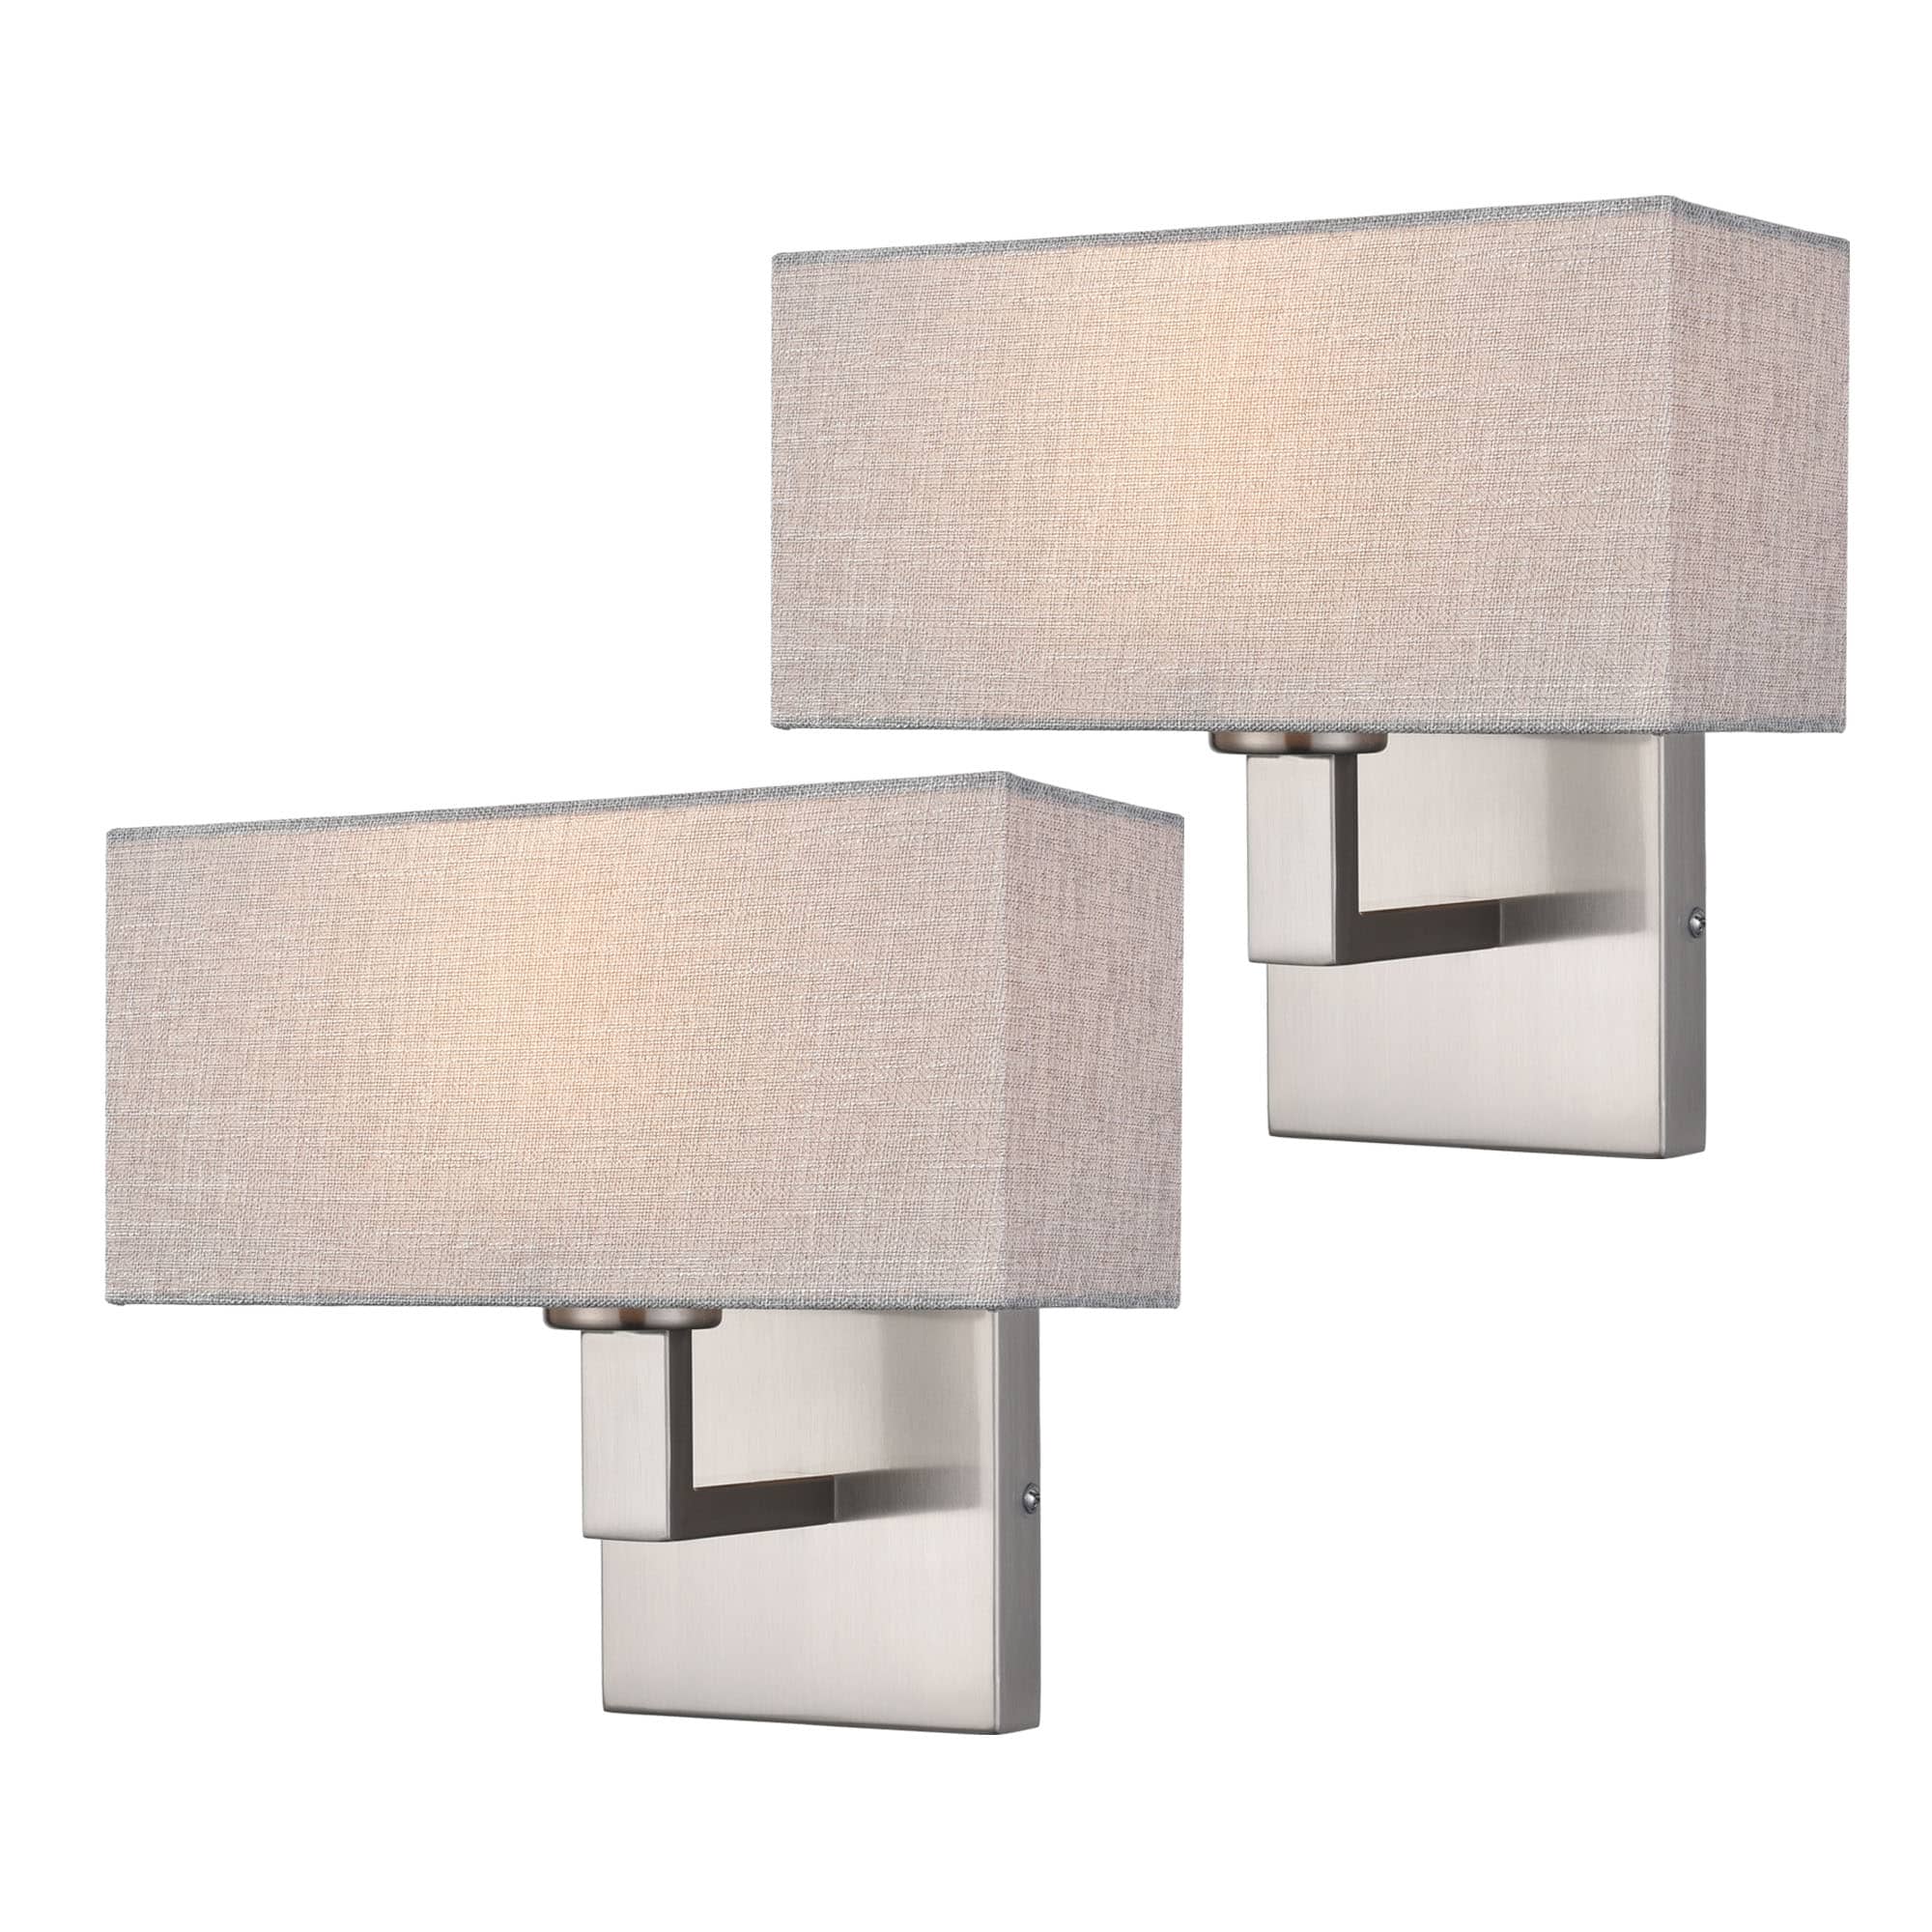 Set of 2 Modern Brushed Nickel with White Fabric Shade Wall Sconces for Bedroom